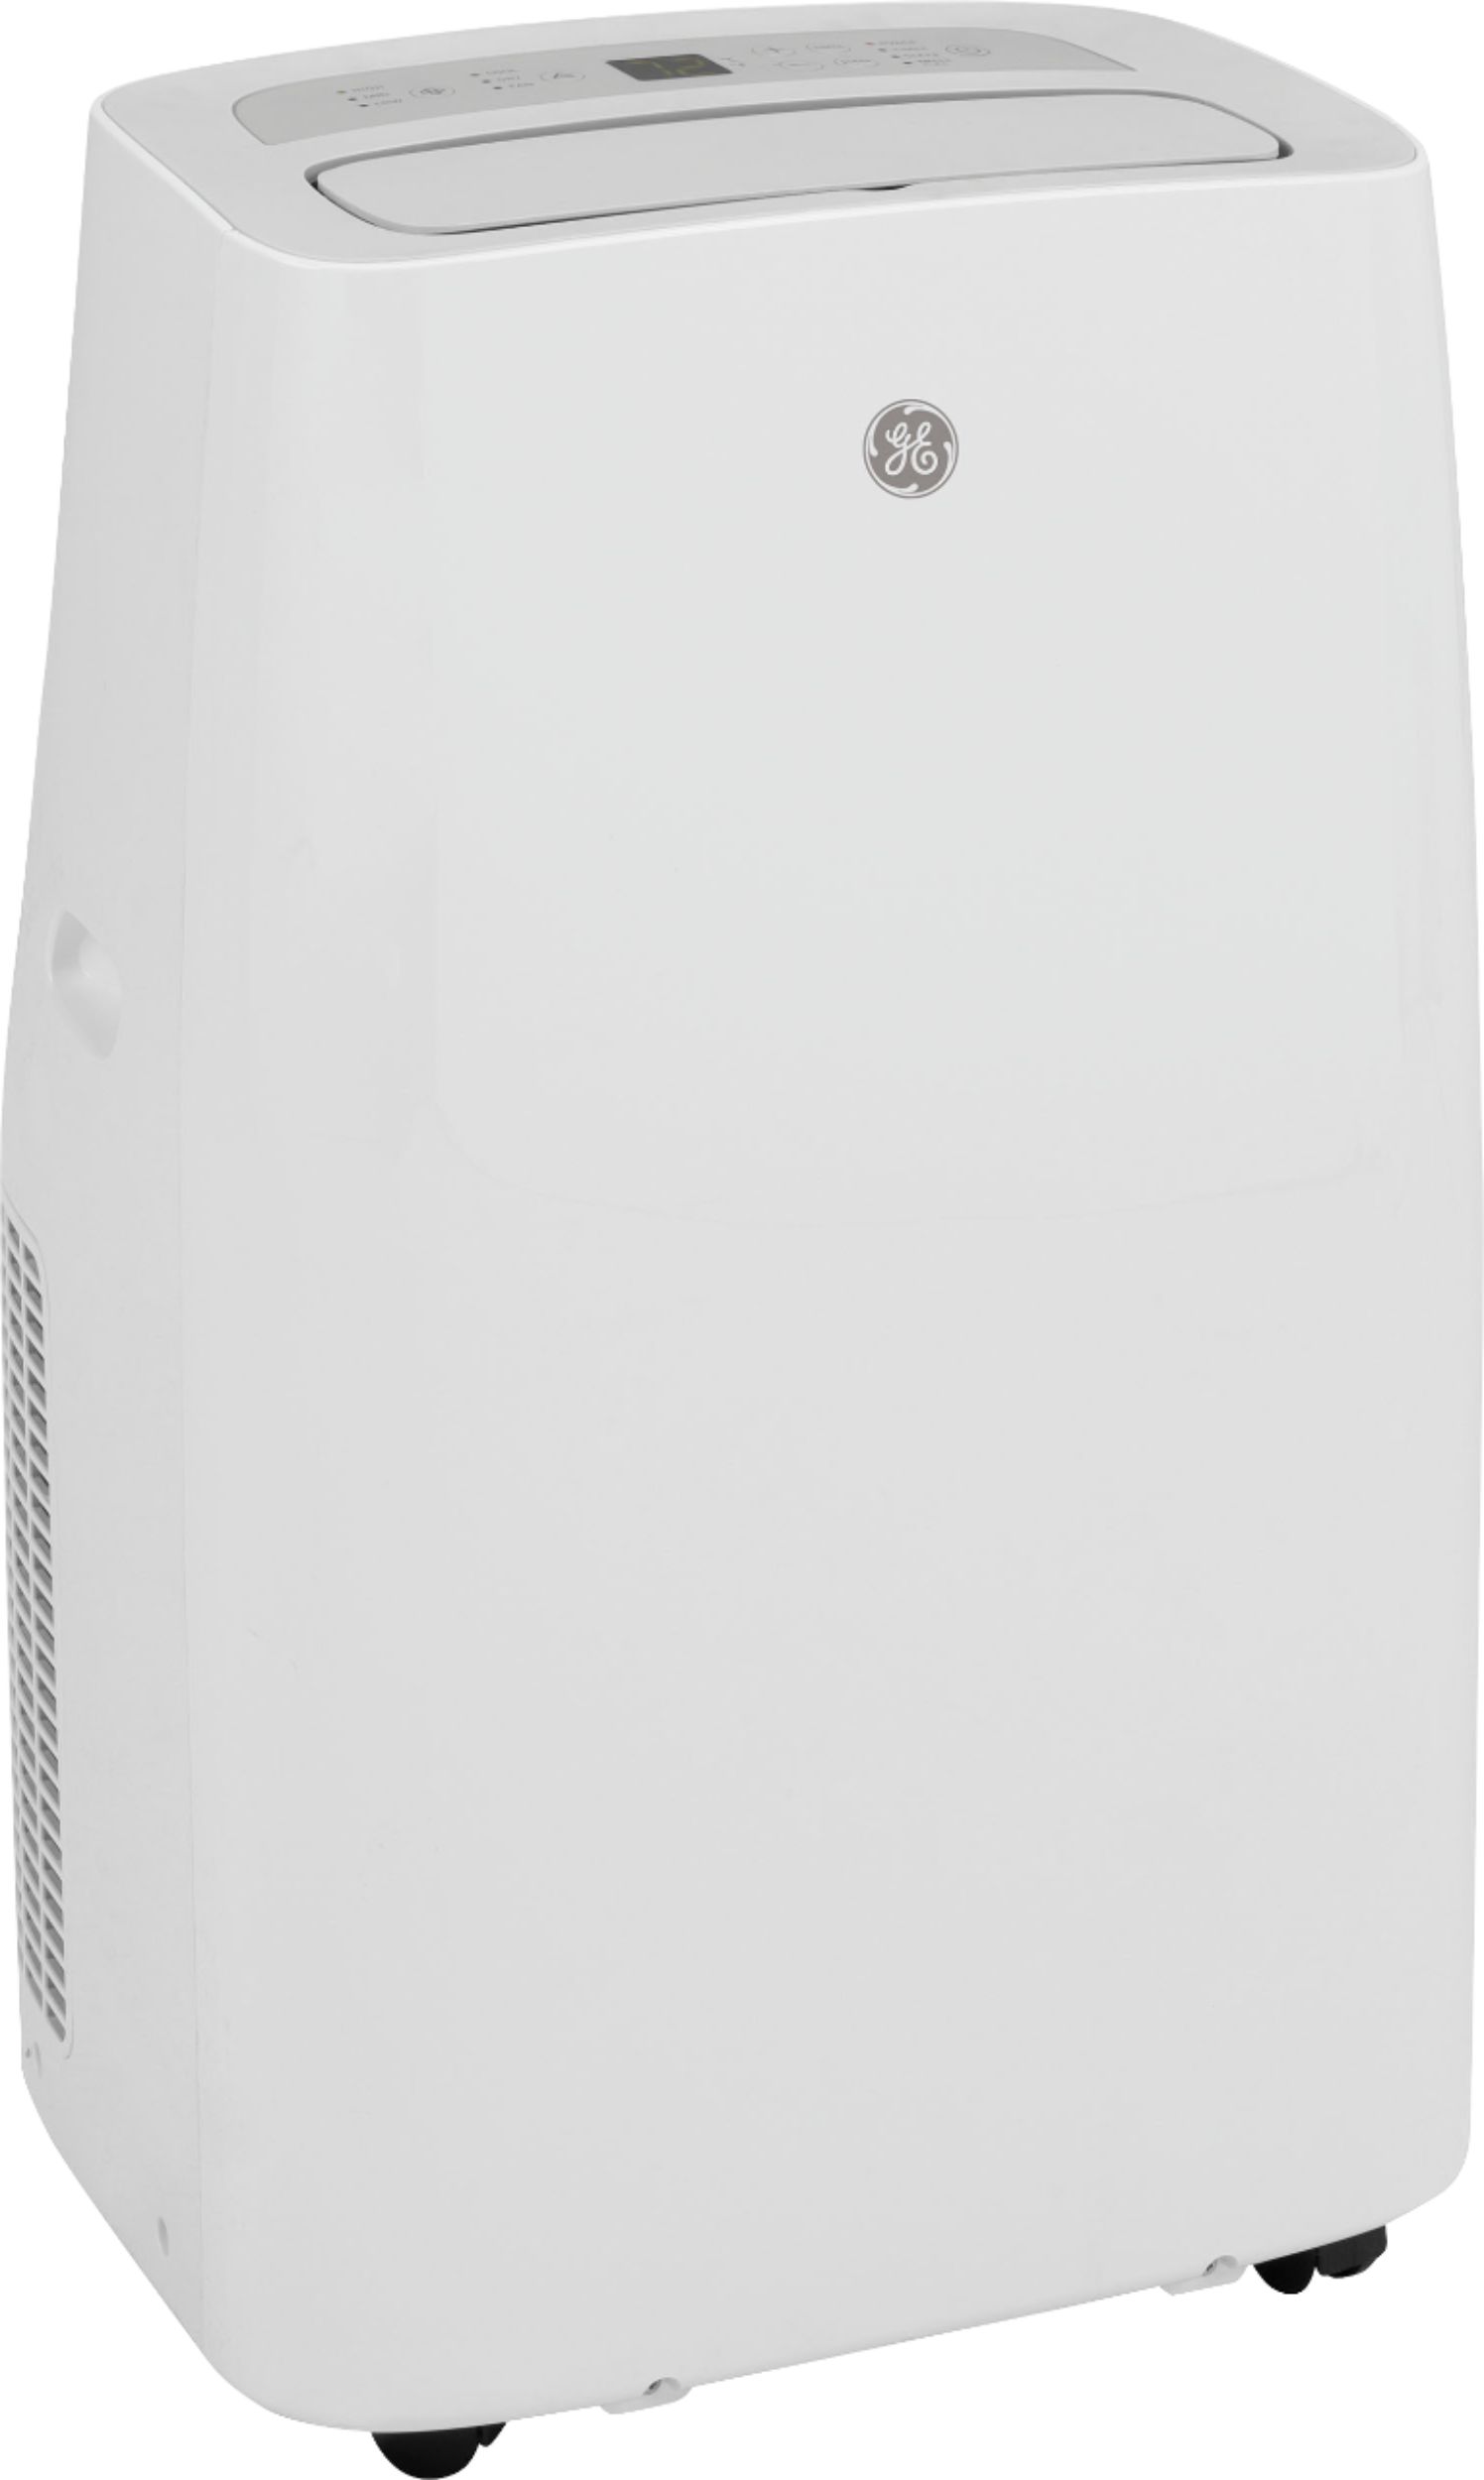 Angle View: GE - 350 Sq. Ft. Portable Air Conditioner - White